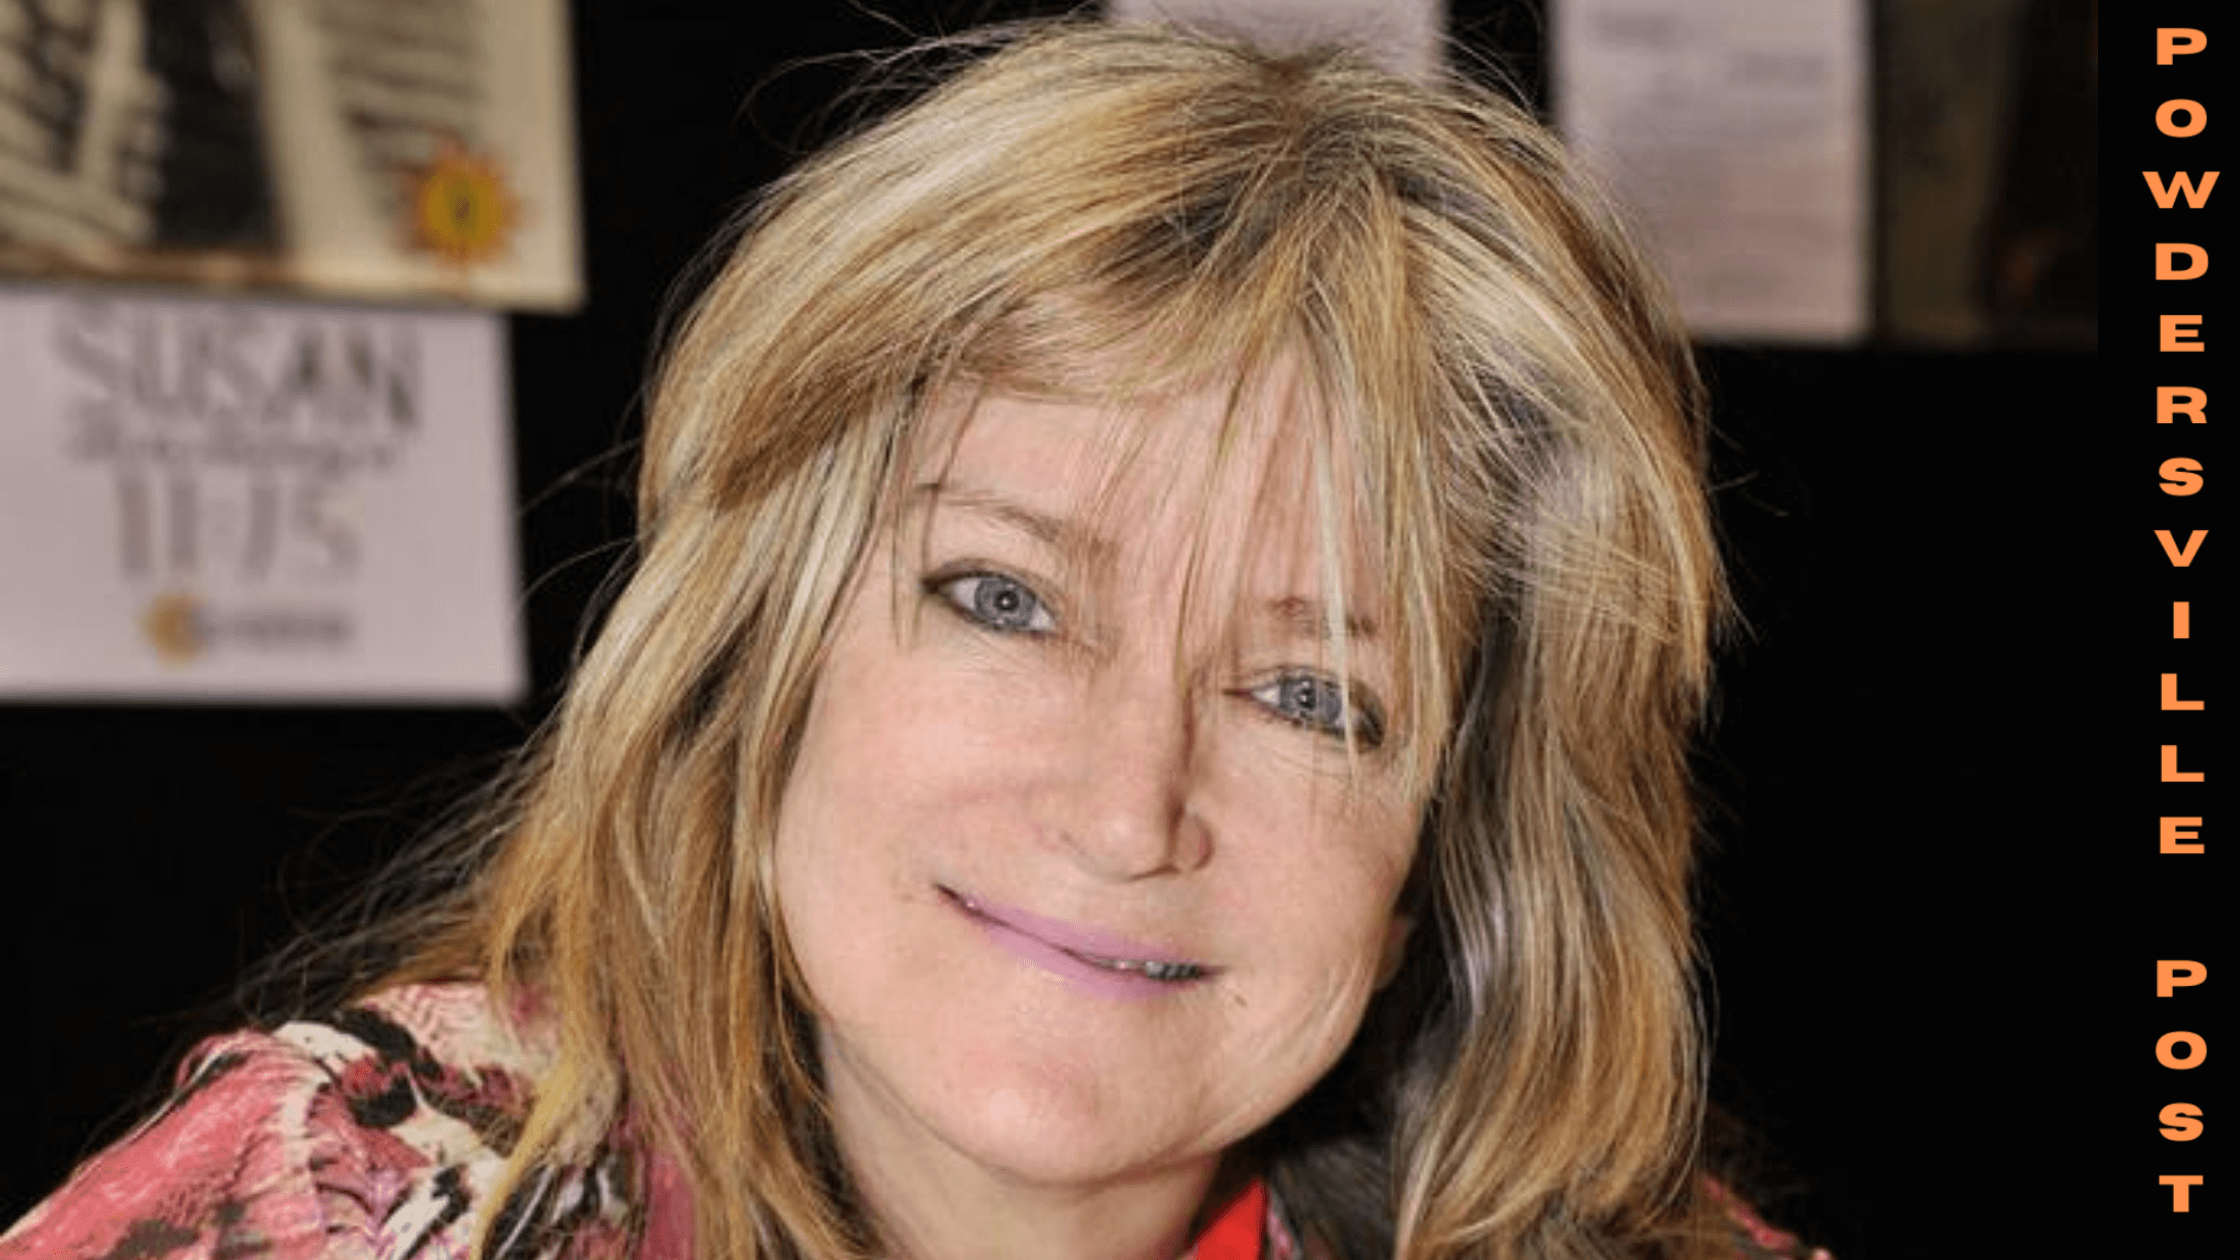 Know About Brady Bunch Actress Susan Olsen-Net worth, Career, Age, And Family